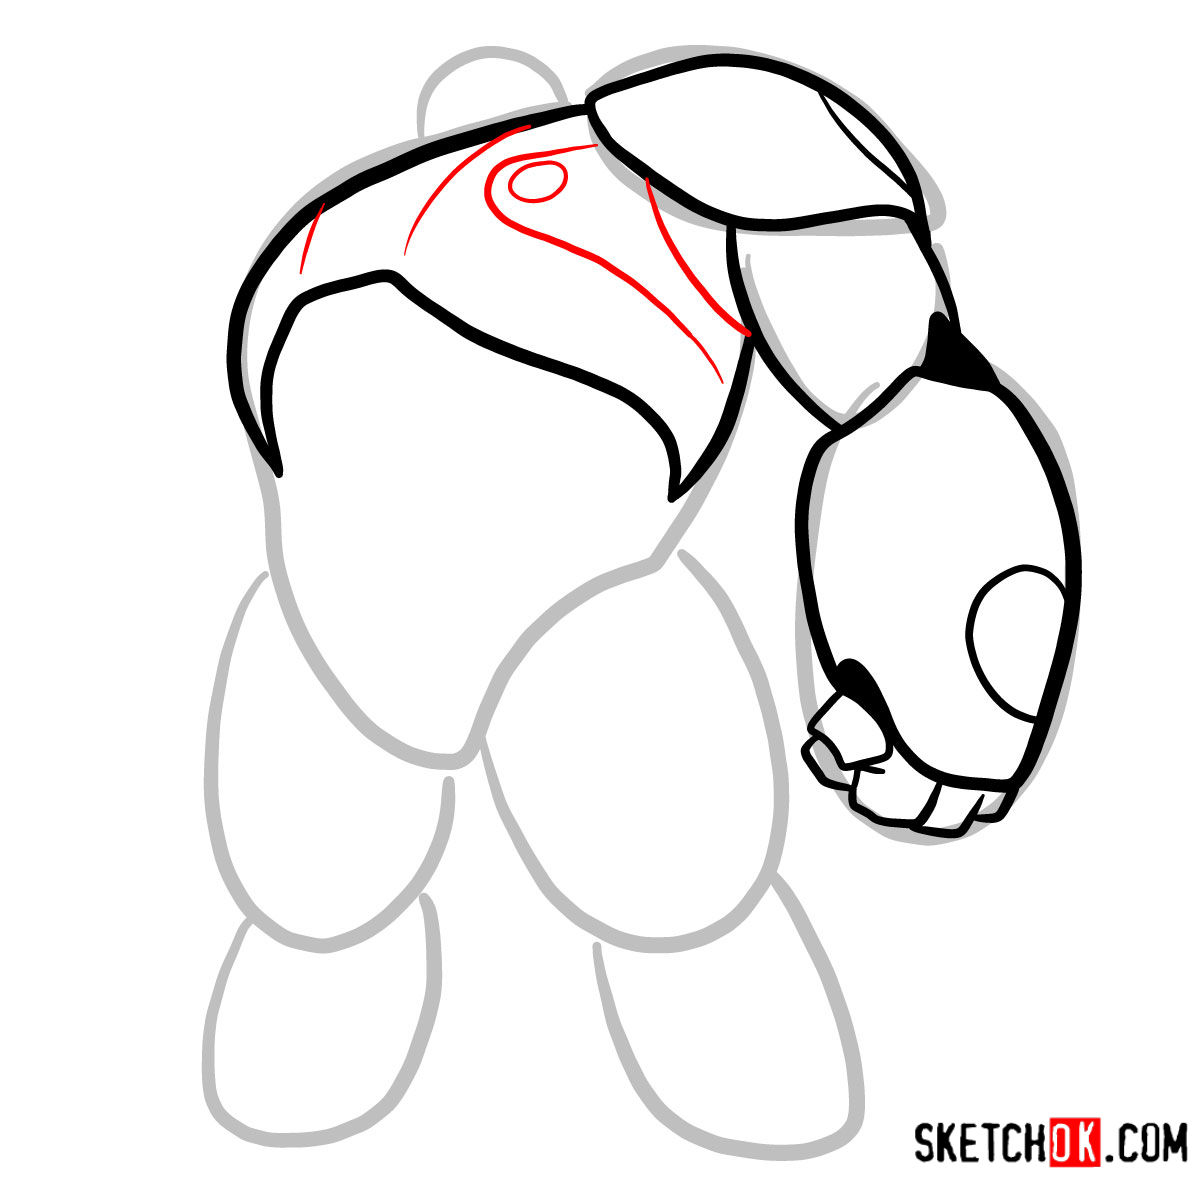 How to draw Baymax in his red armored suit - step 05